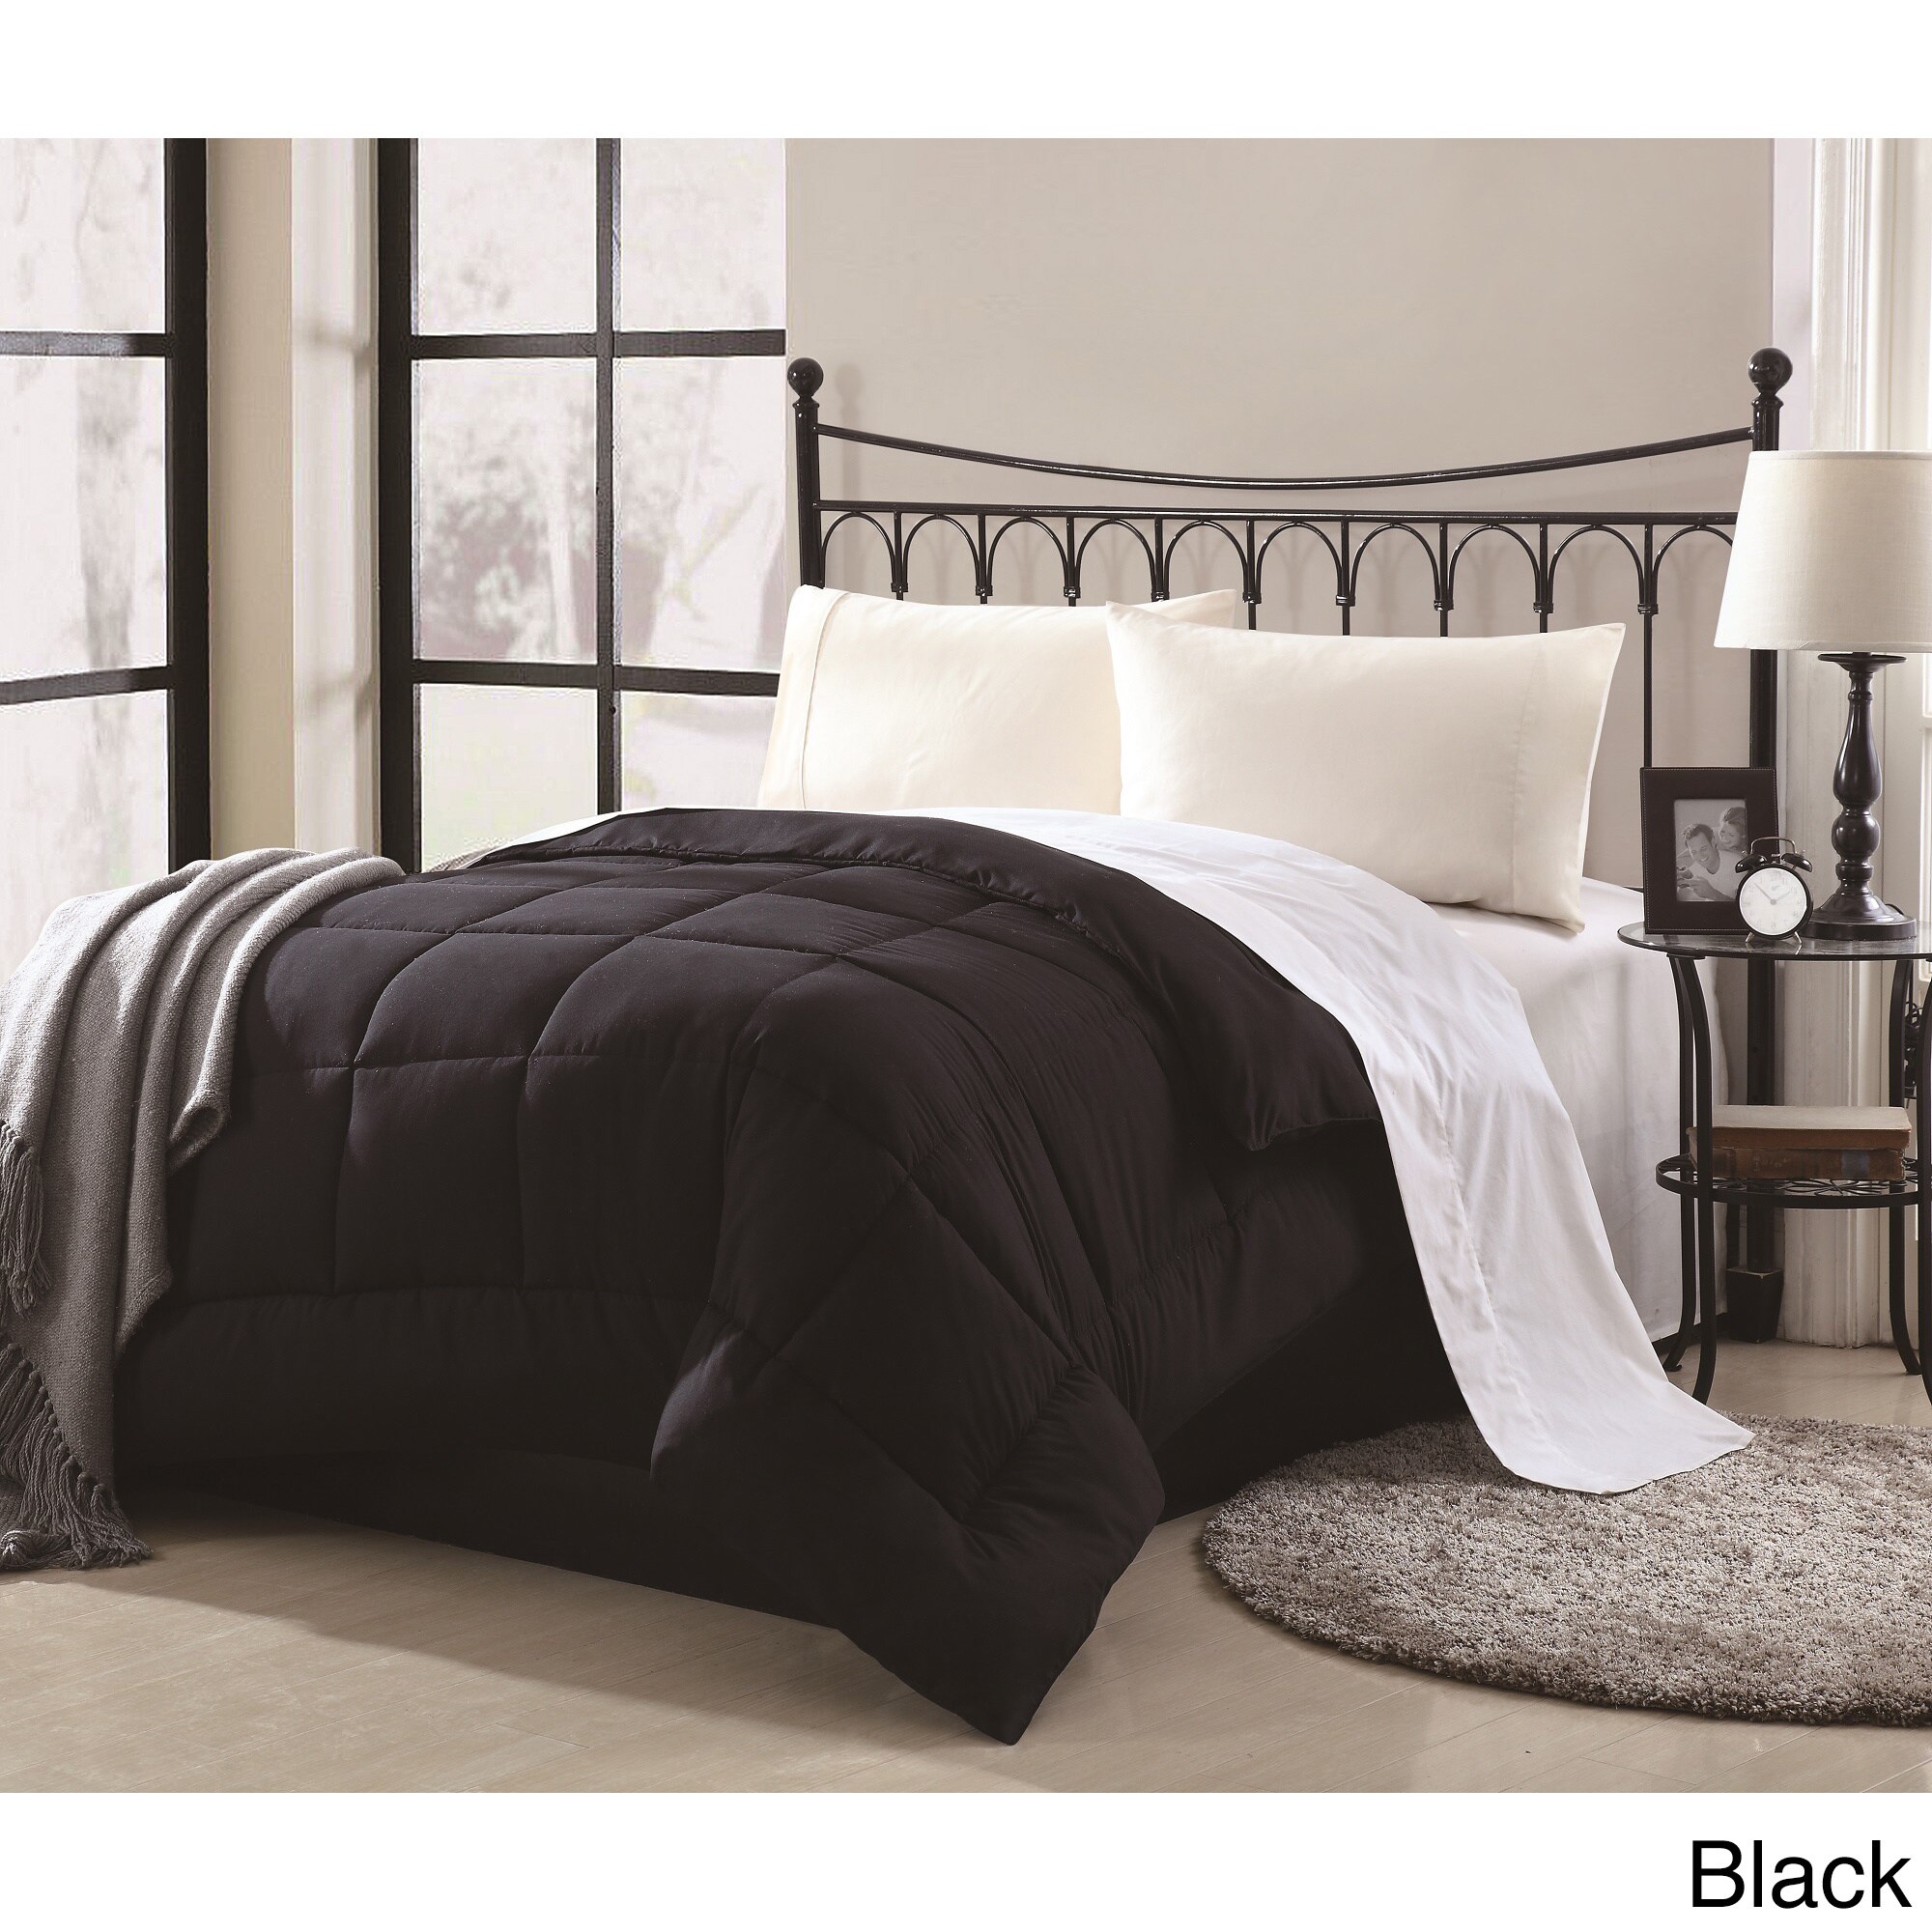 Private Lennox Overfilled Solid Color Microfiber Down Alternative Comforter Black Size Twin